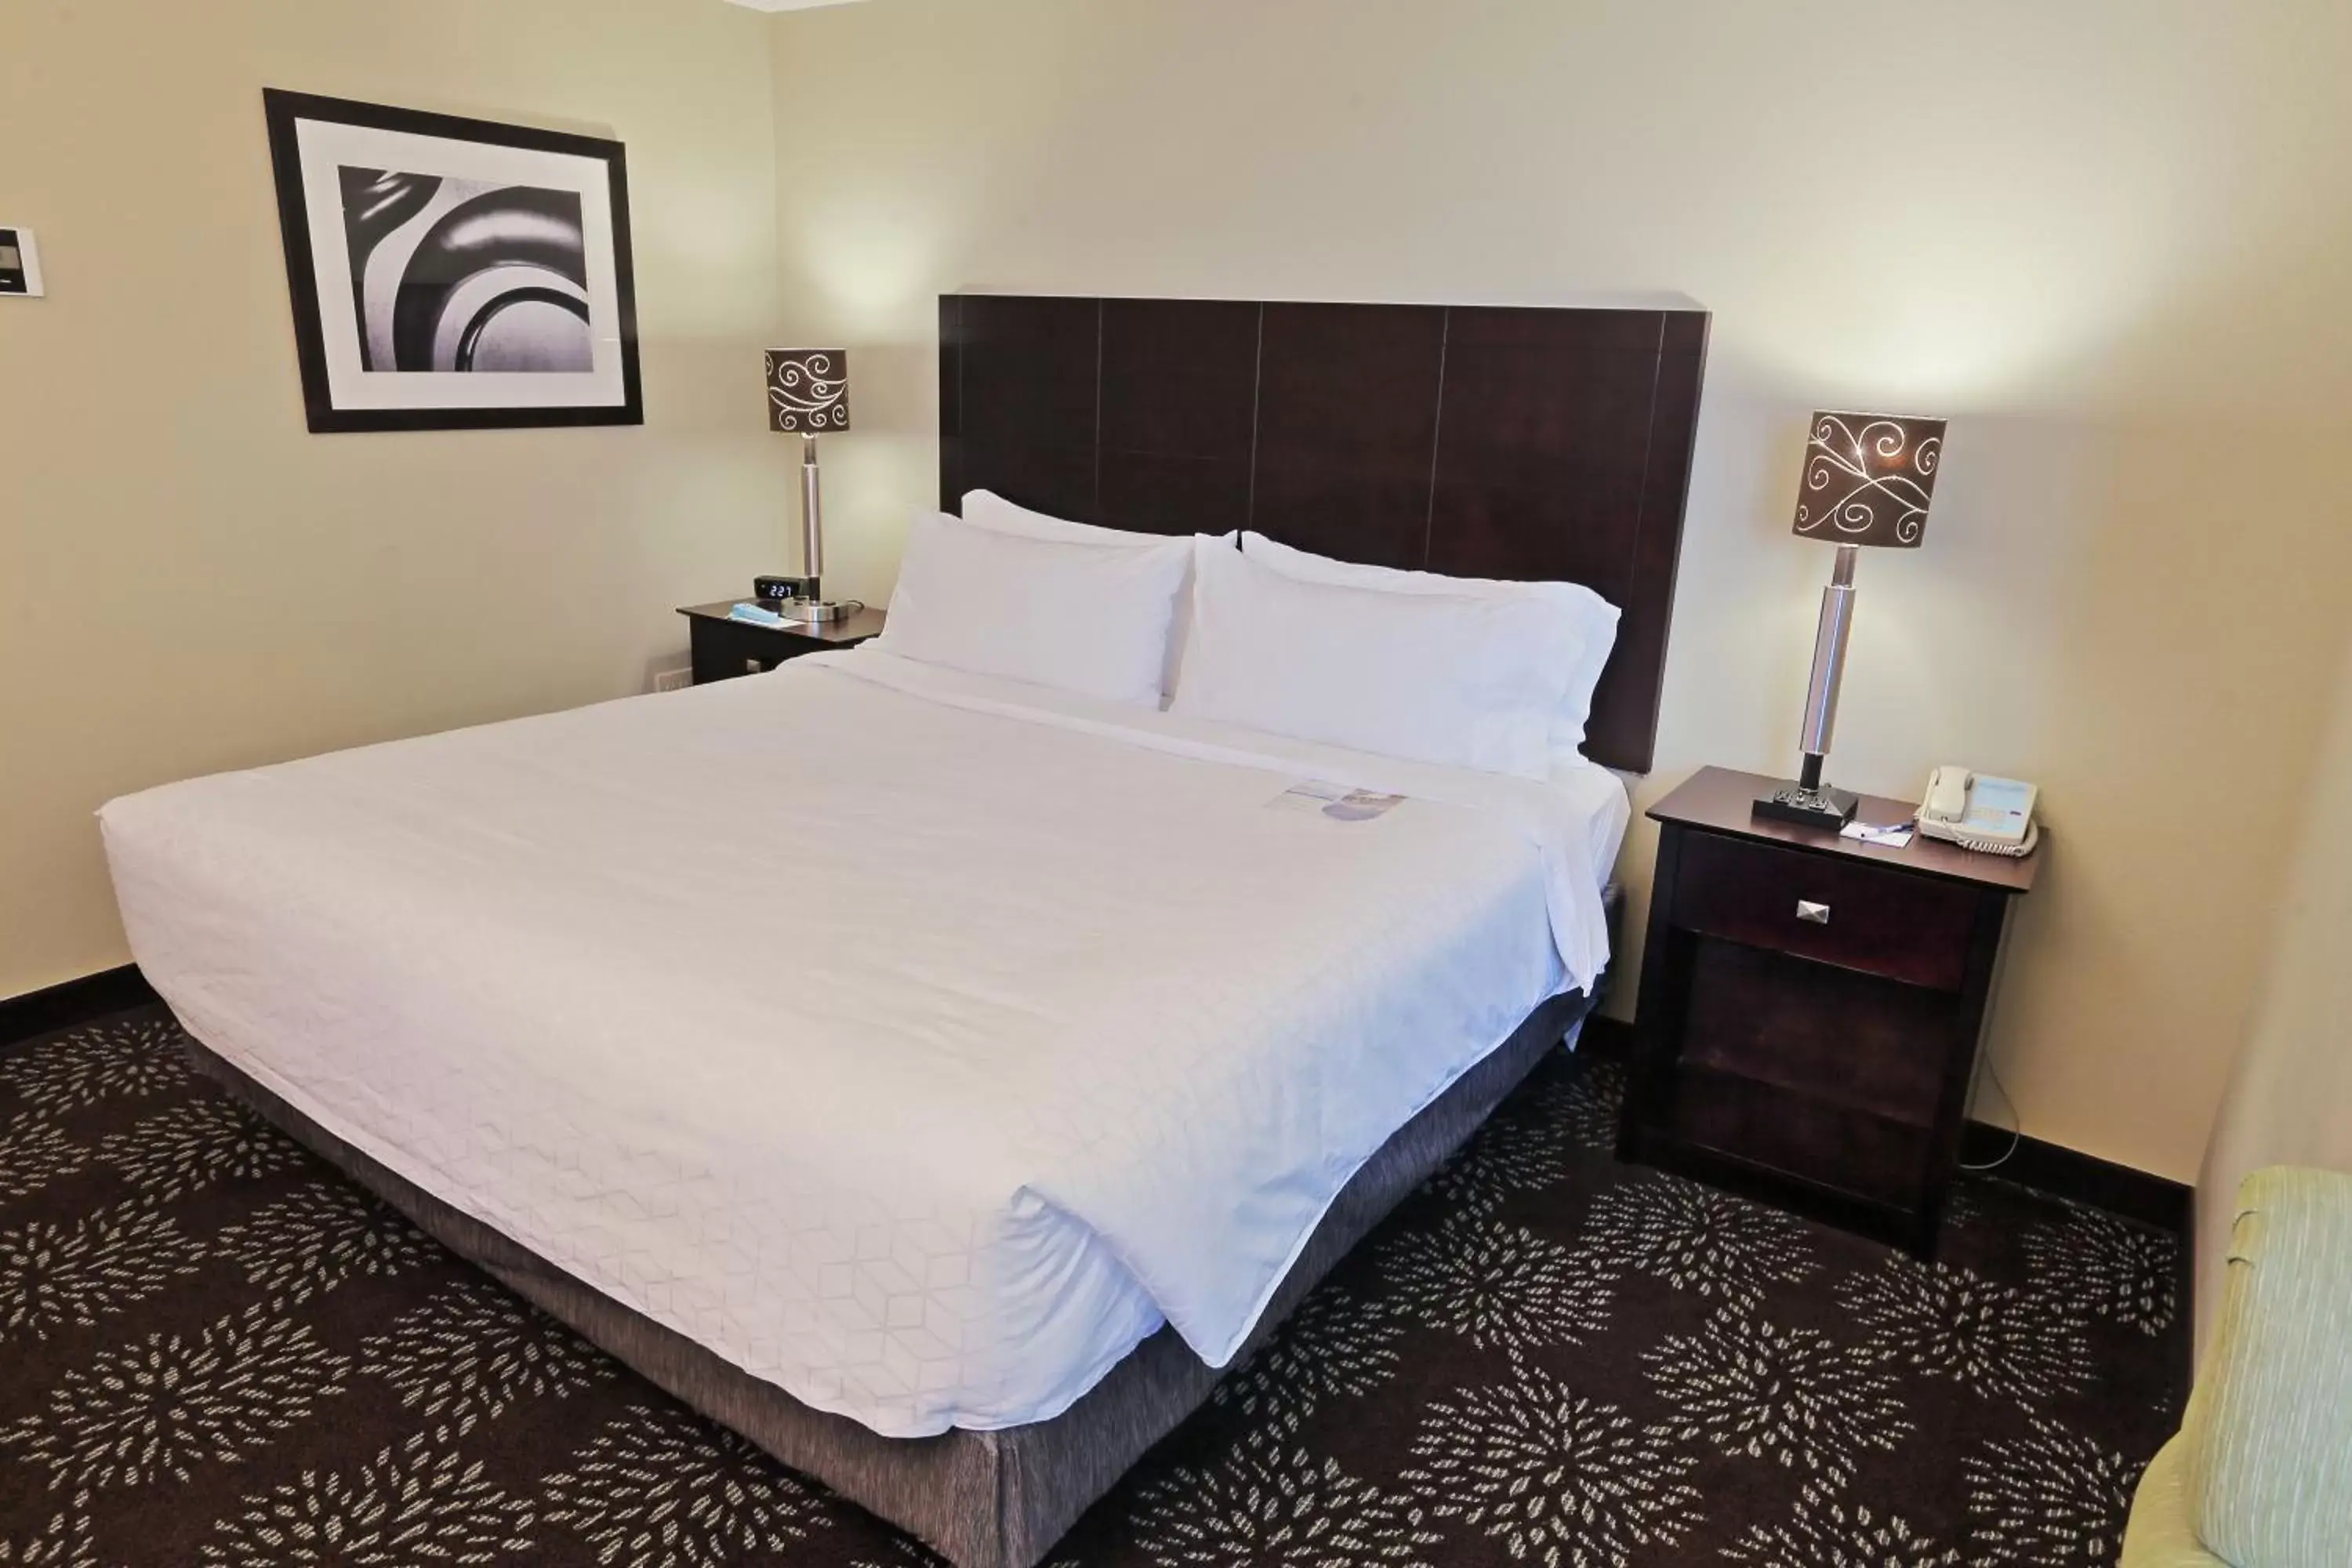 Bed, Room Photo in Holiday Inn Express Pittsburgh West - Greentree, an IHG Hotel